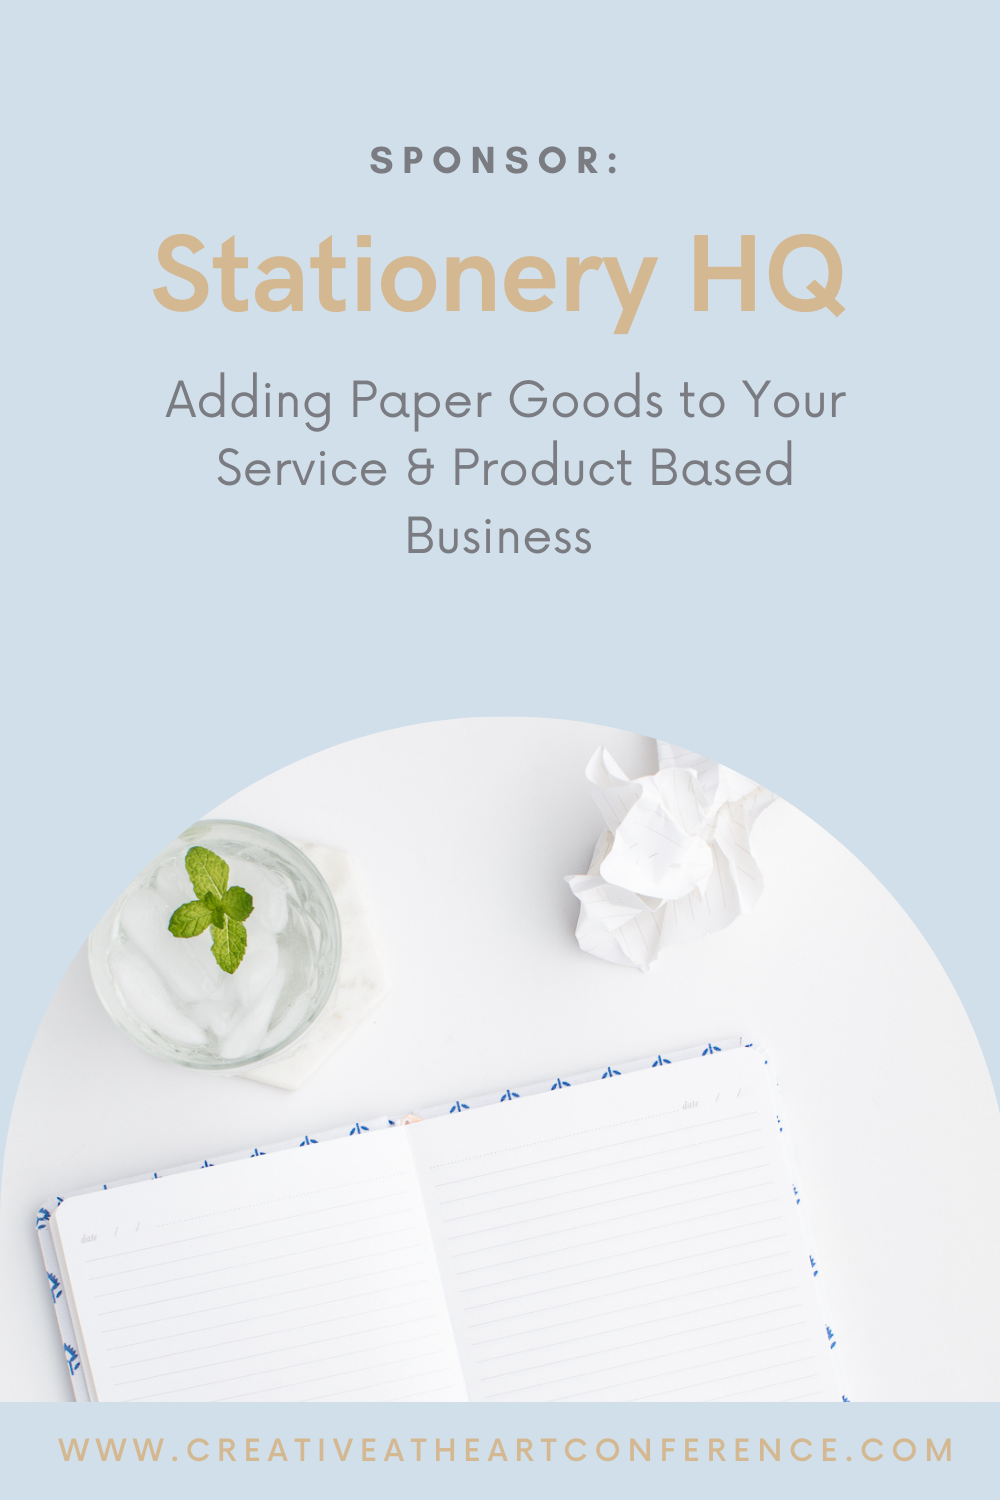 Stationery HQ, Round 10 sponsor for Creative@Heart Conference, shares how to use paper goods to enhance your client experience in your service-based or product-based business